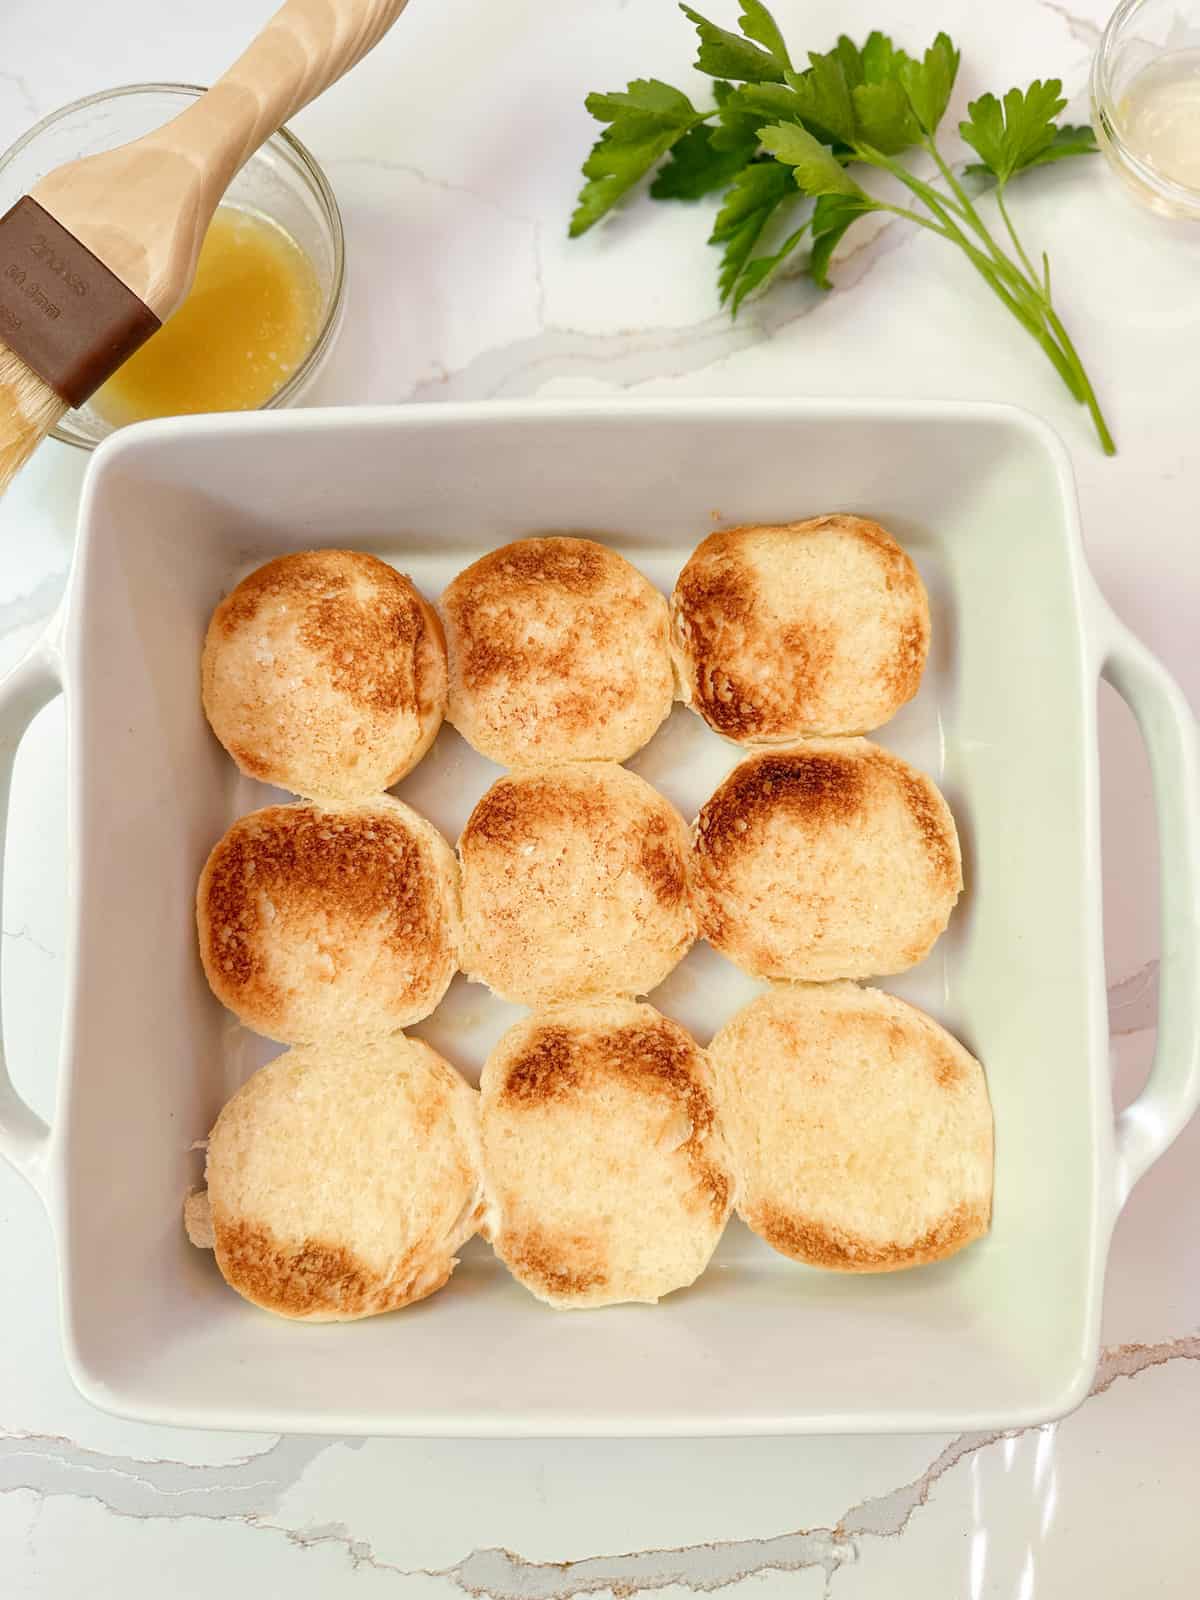 Buttered and toasted slider buns in a pan.